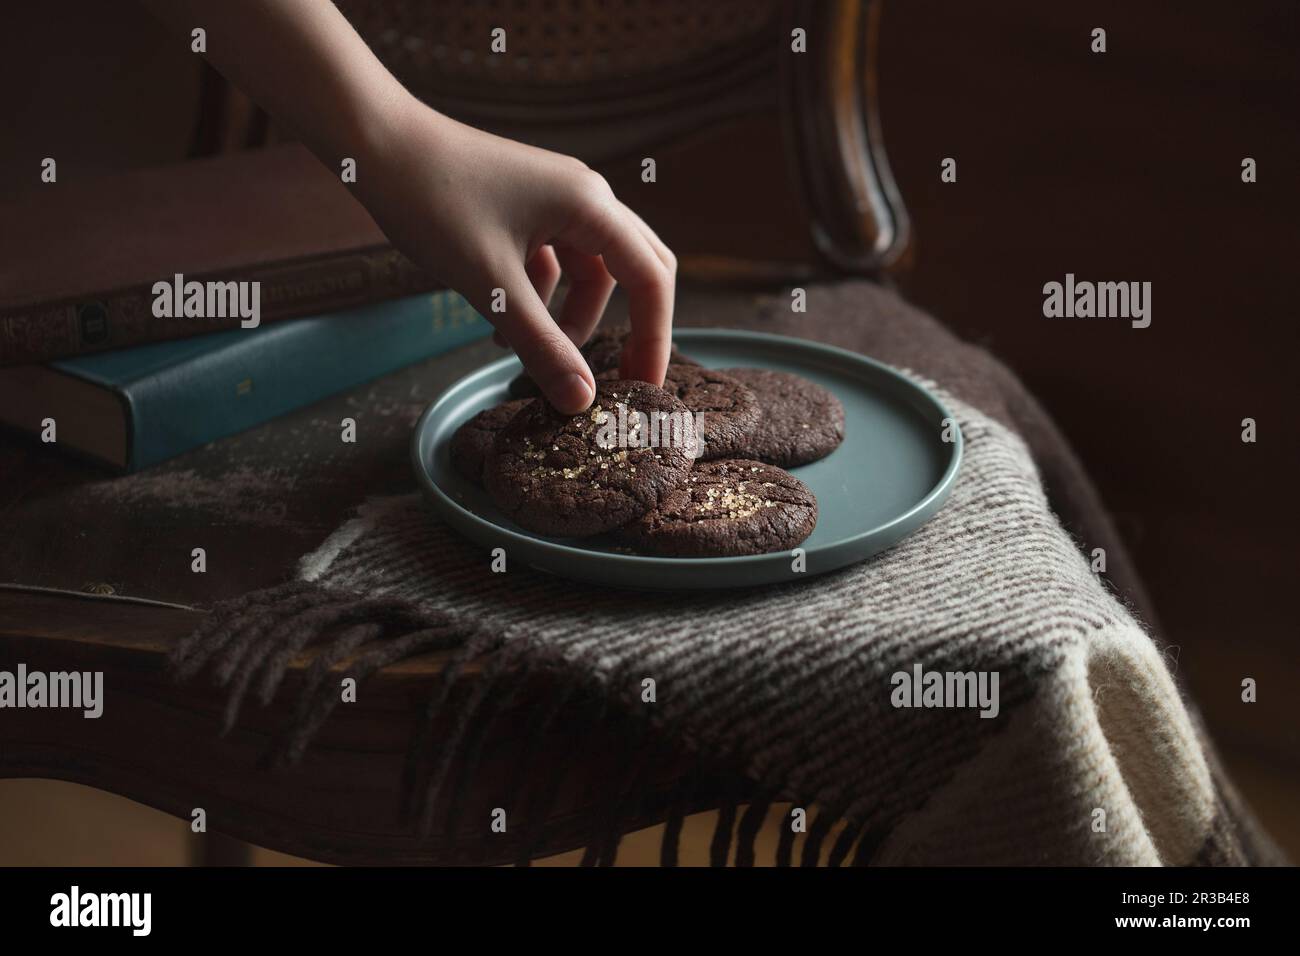 Chocolate cookies on the plate. Dark and Moody, Mystic Light food photography. Children's hand takes Stock Photo